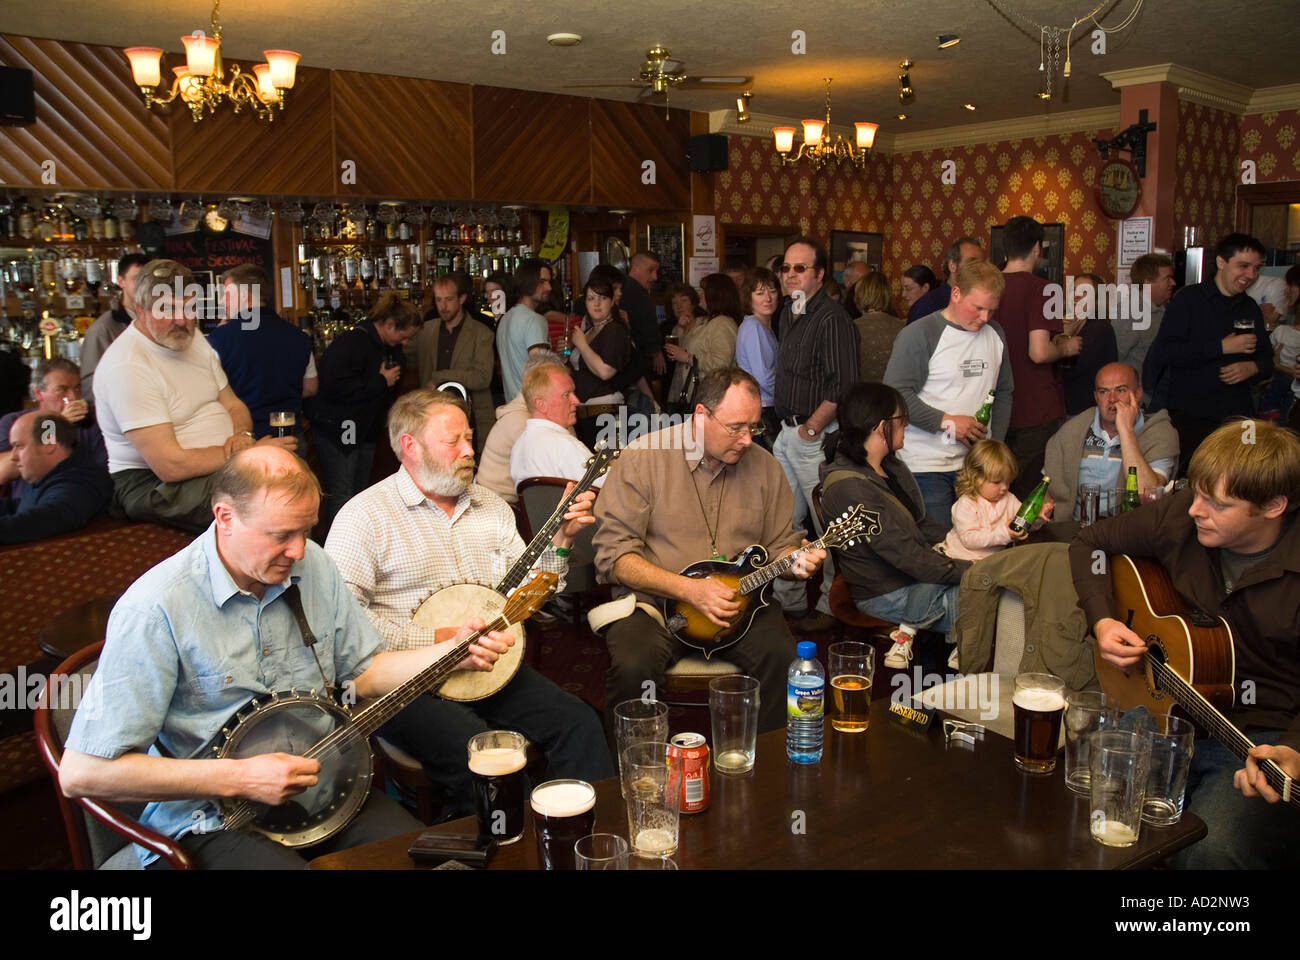 dh Folk Festival performers STROMNESS HOTEL ORKNEY SCOTLAND Musicians playing banjos guitar scottish traditional pub interior banjo music band Stock Photo